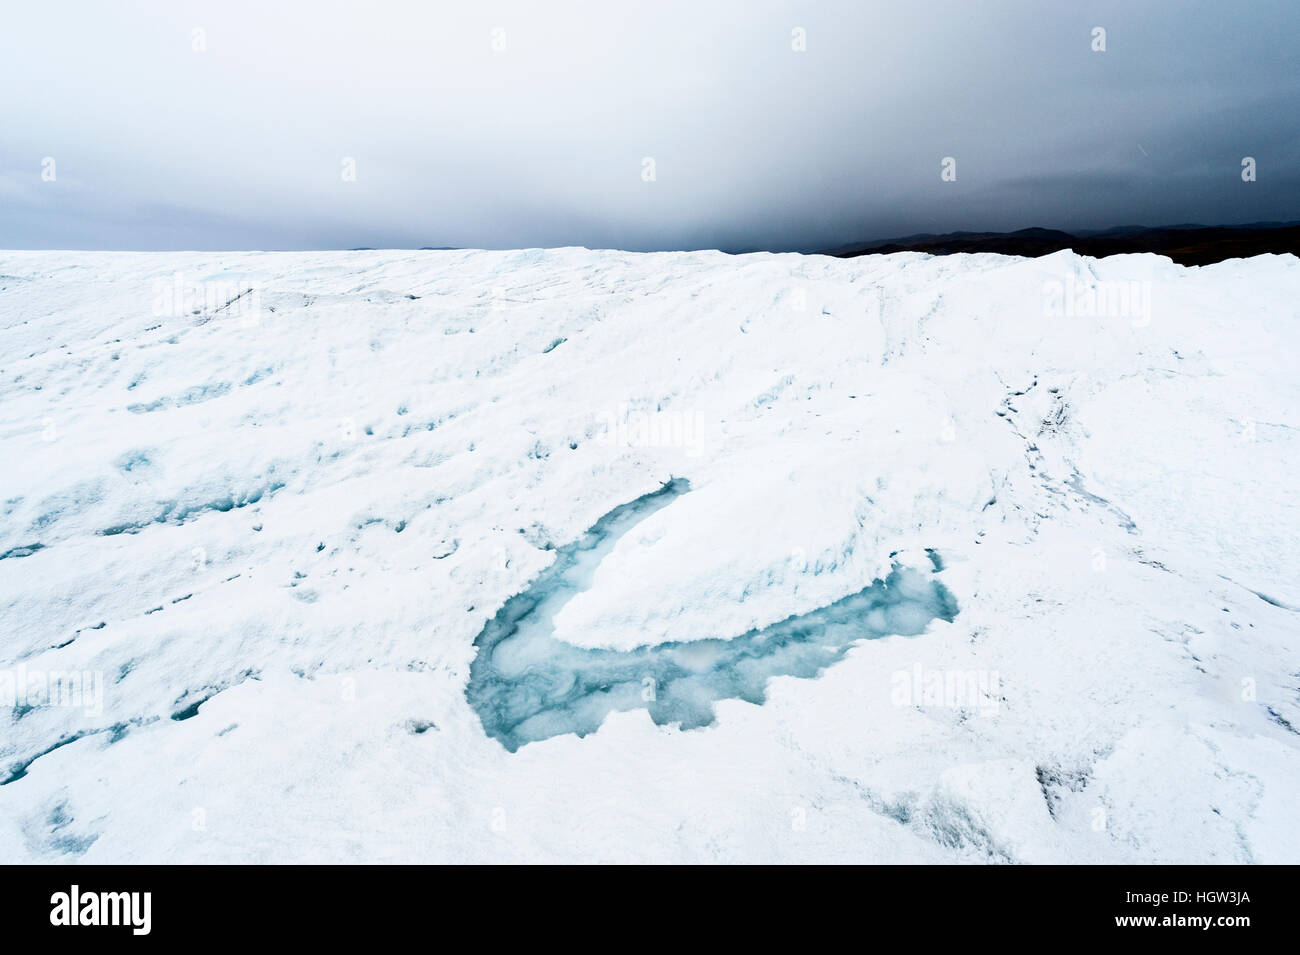 A melt pond on the surface of the Greenland Ice Shelf. Stock Photo